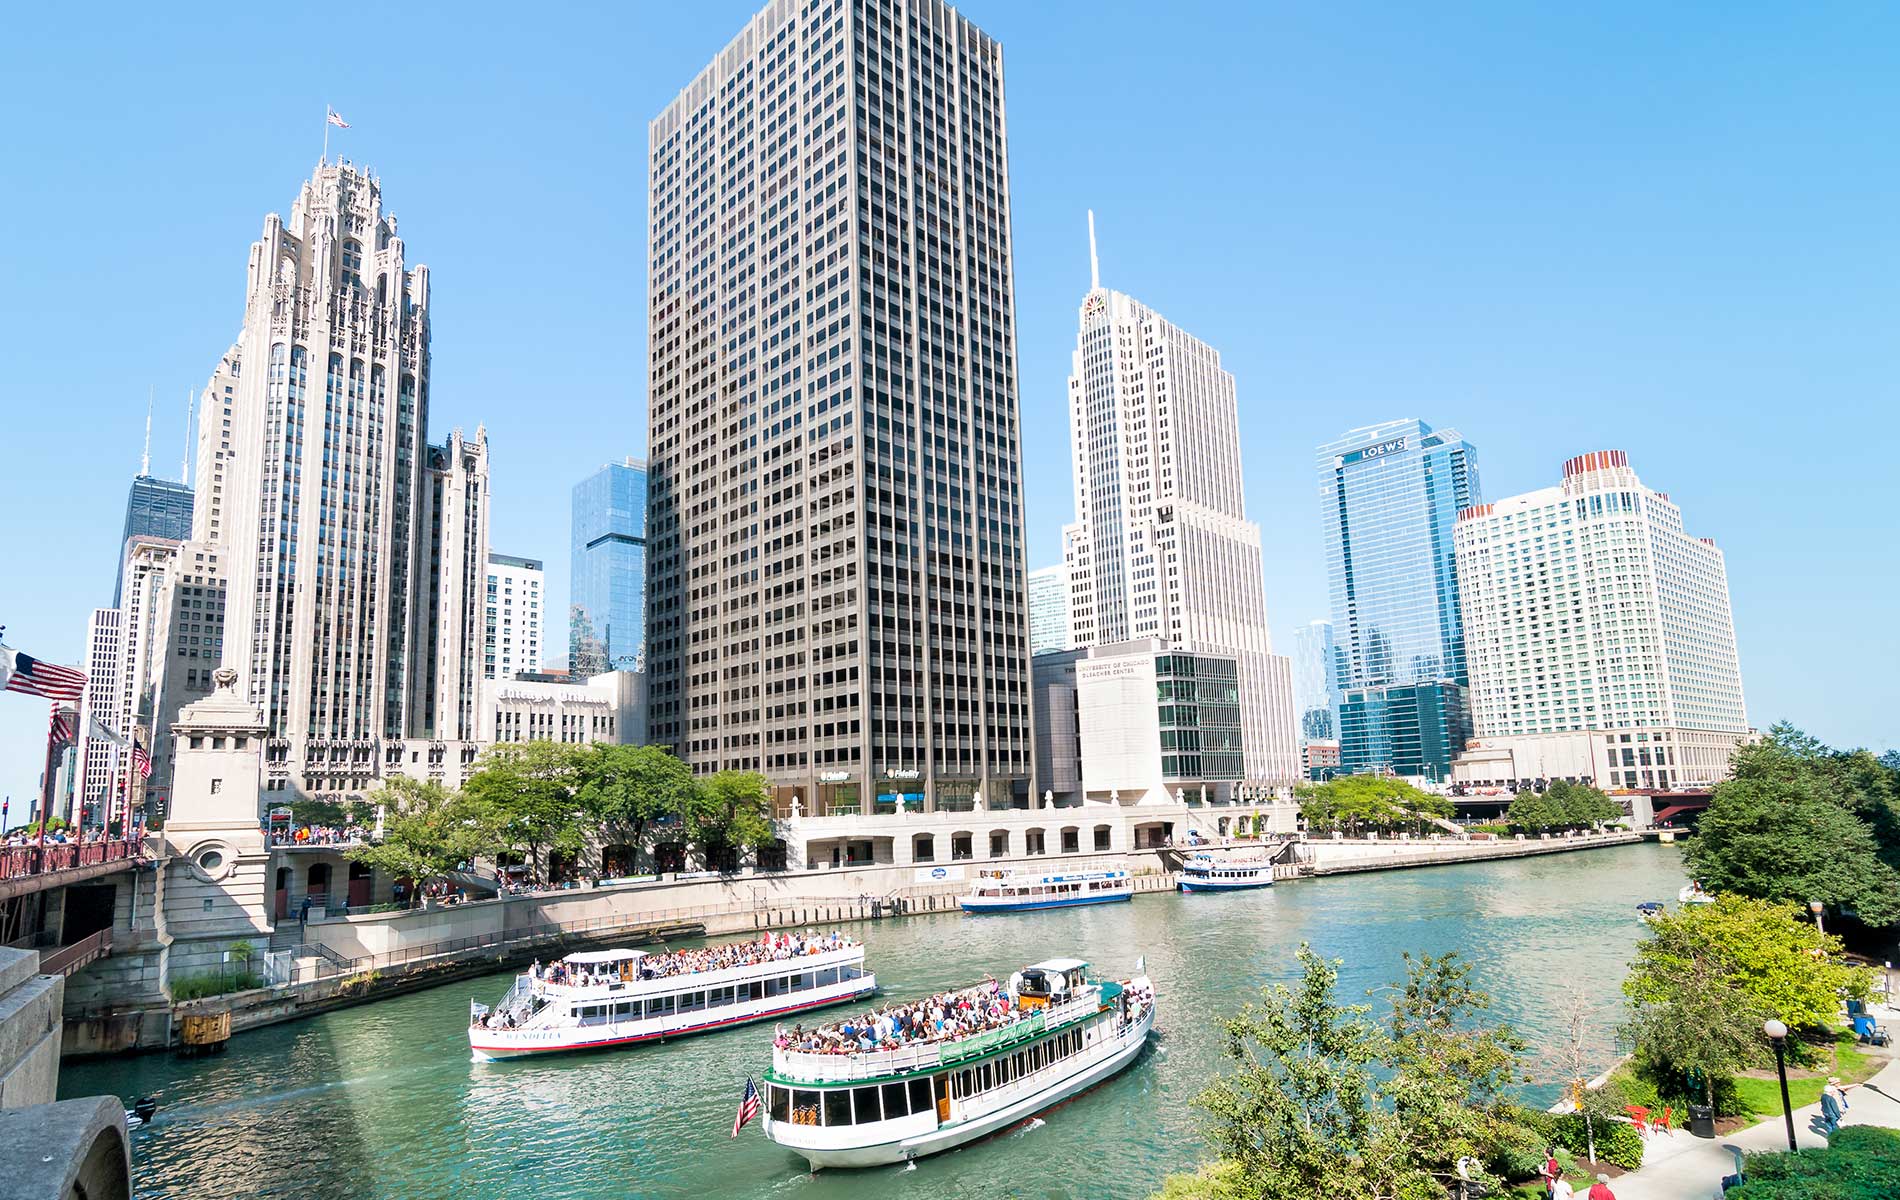 The Chicago Architecture Foundation River Cruise is a staple for visitors who wish to learn about the city’s unique architectural history.